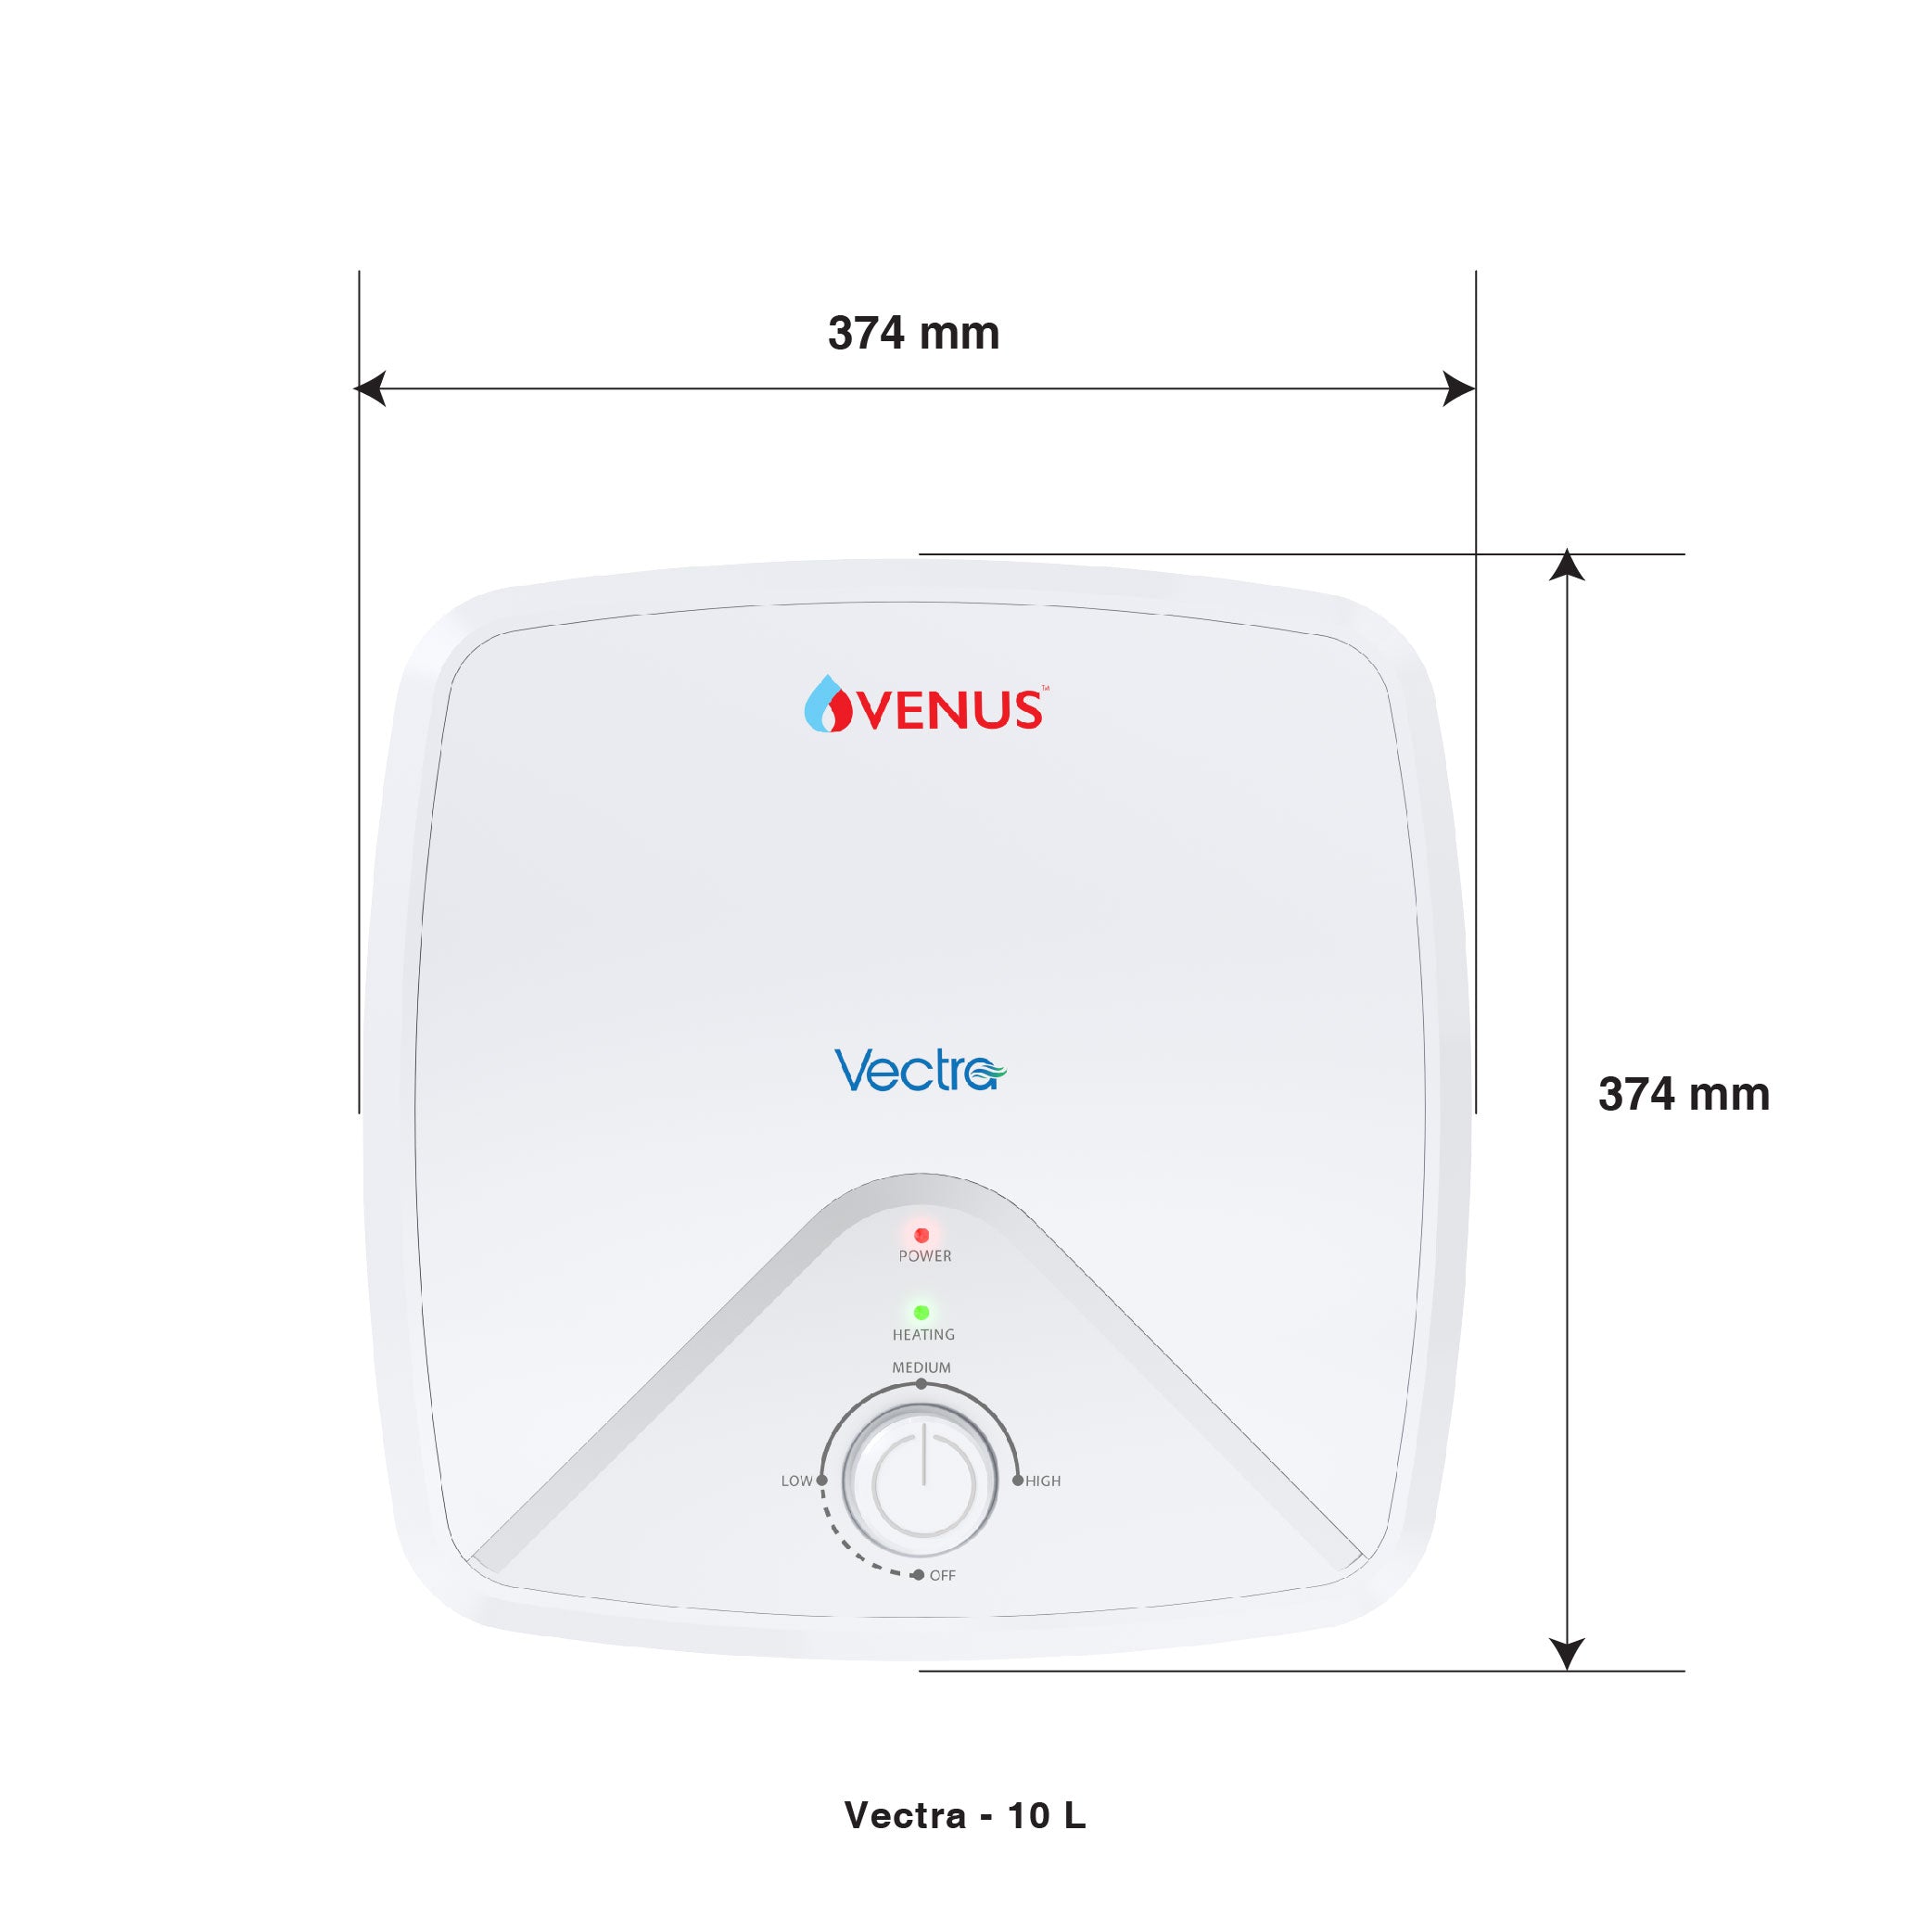 Venus Vertical Water Heater 10L Capacity with Flexible Hose Pipe Vectra